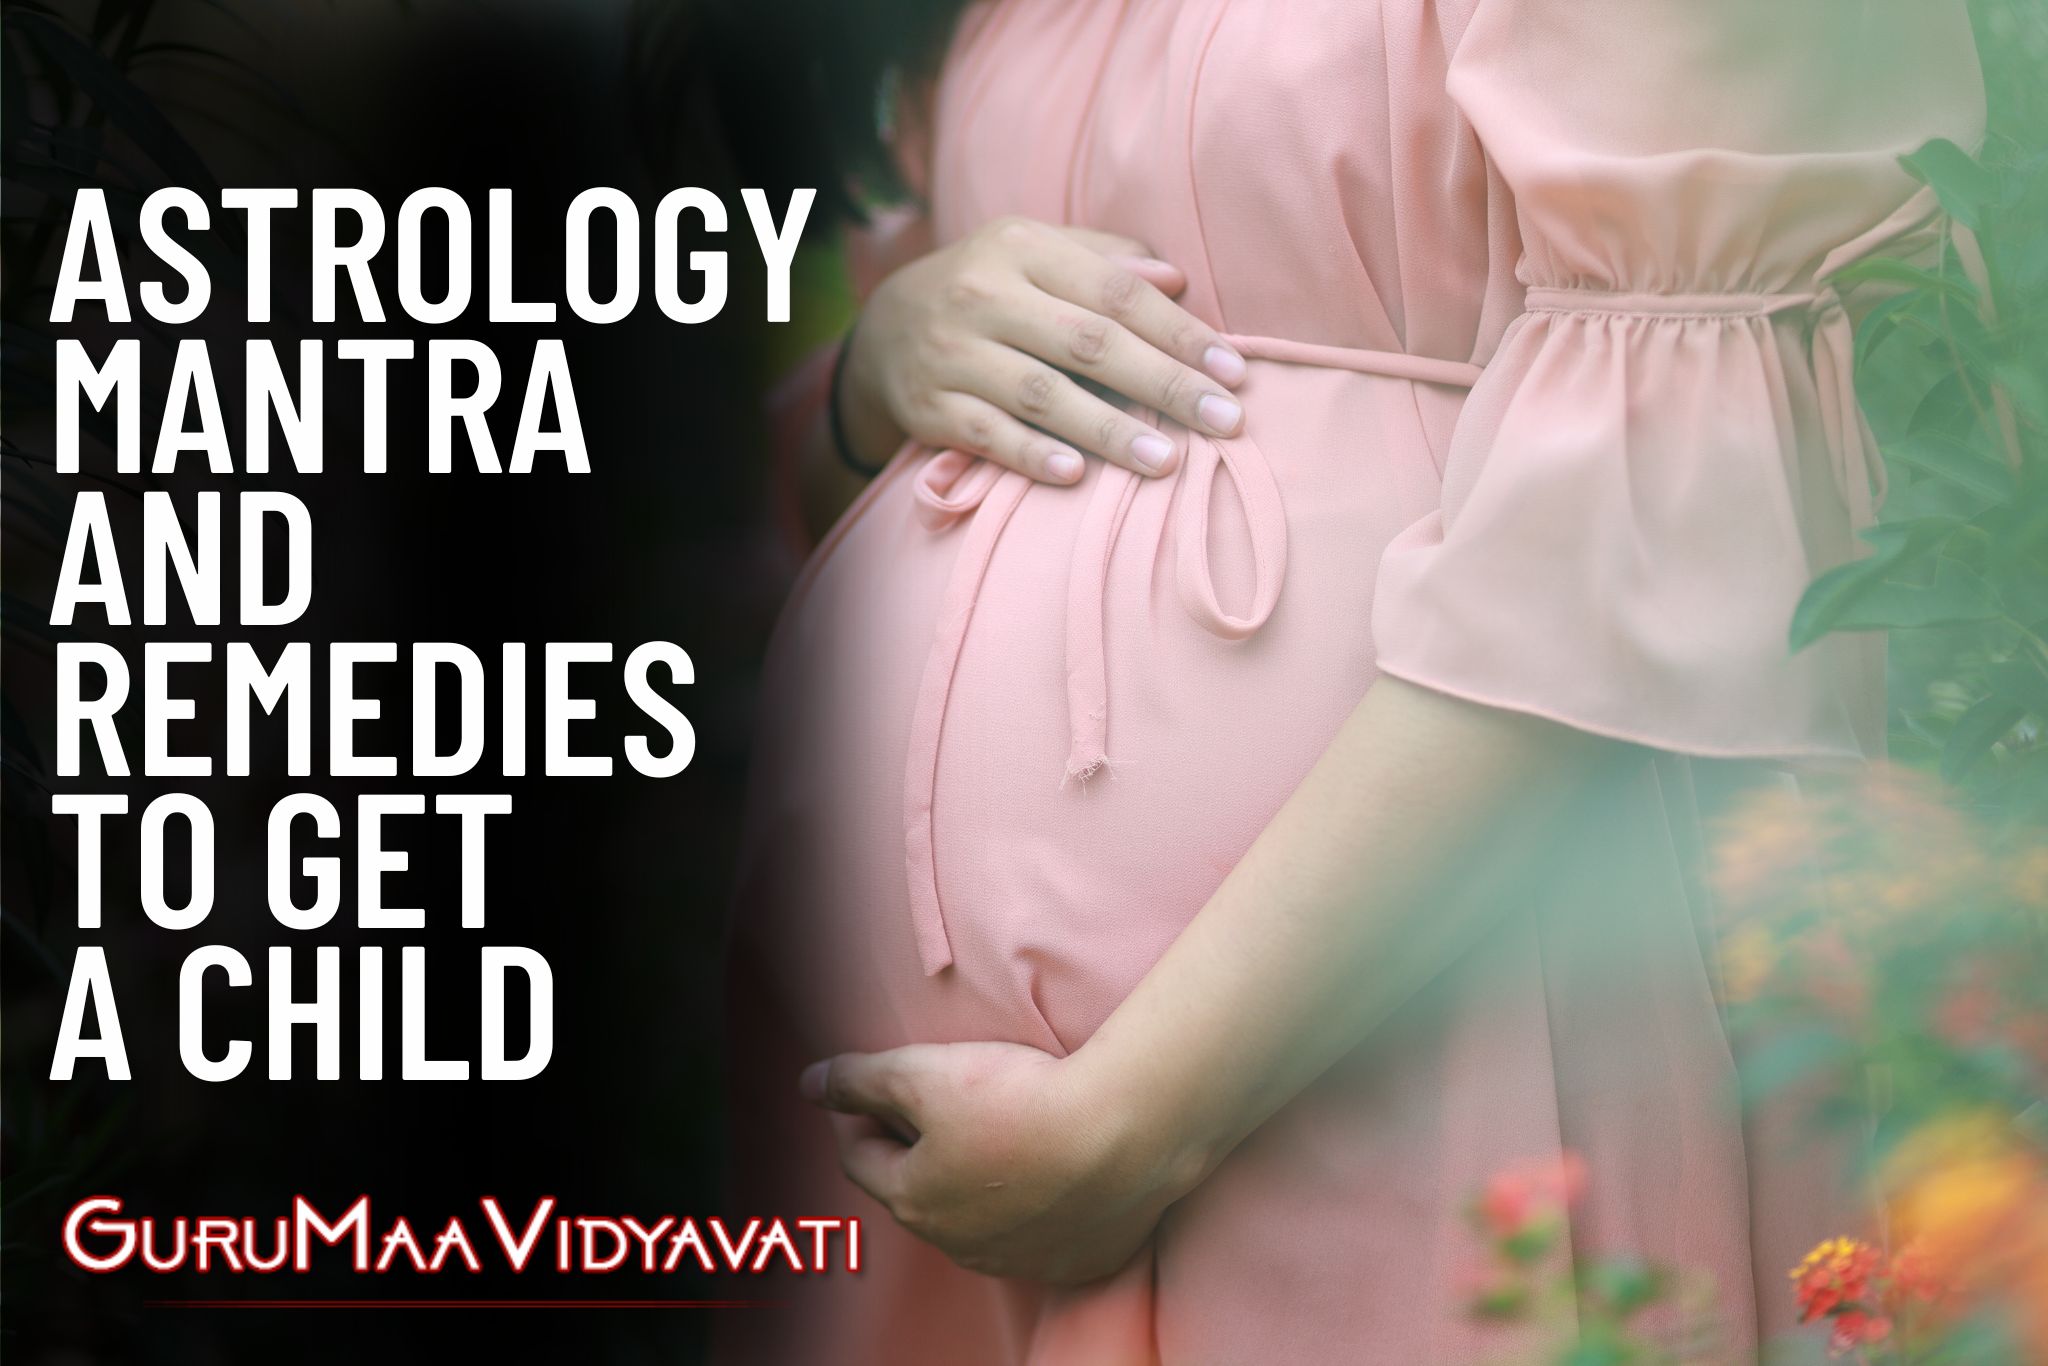 Astrological Mantras and Remedies to Get a Child